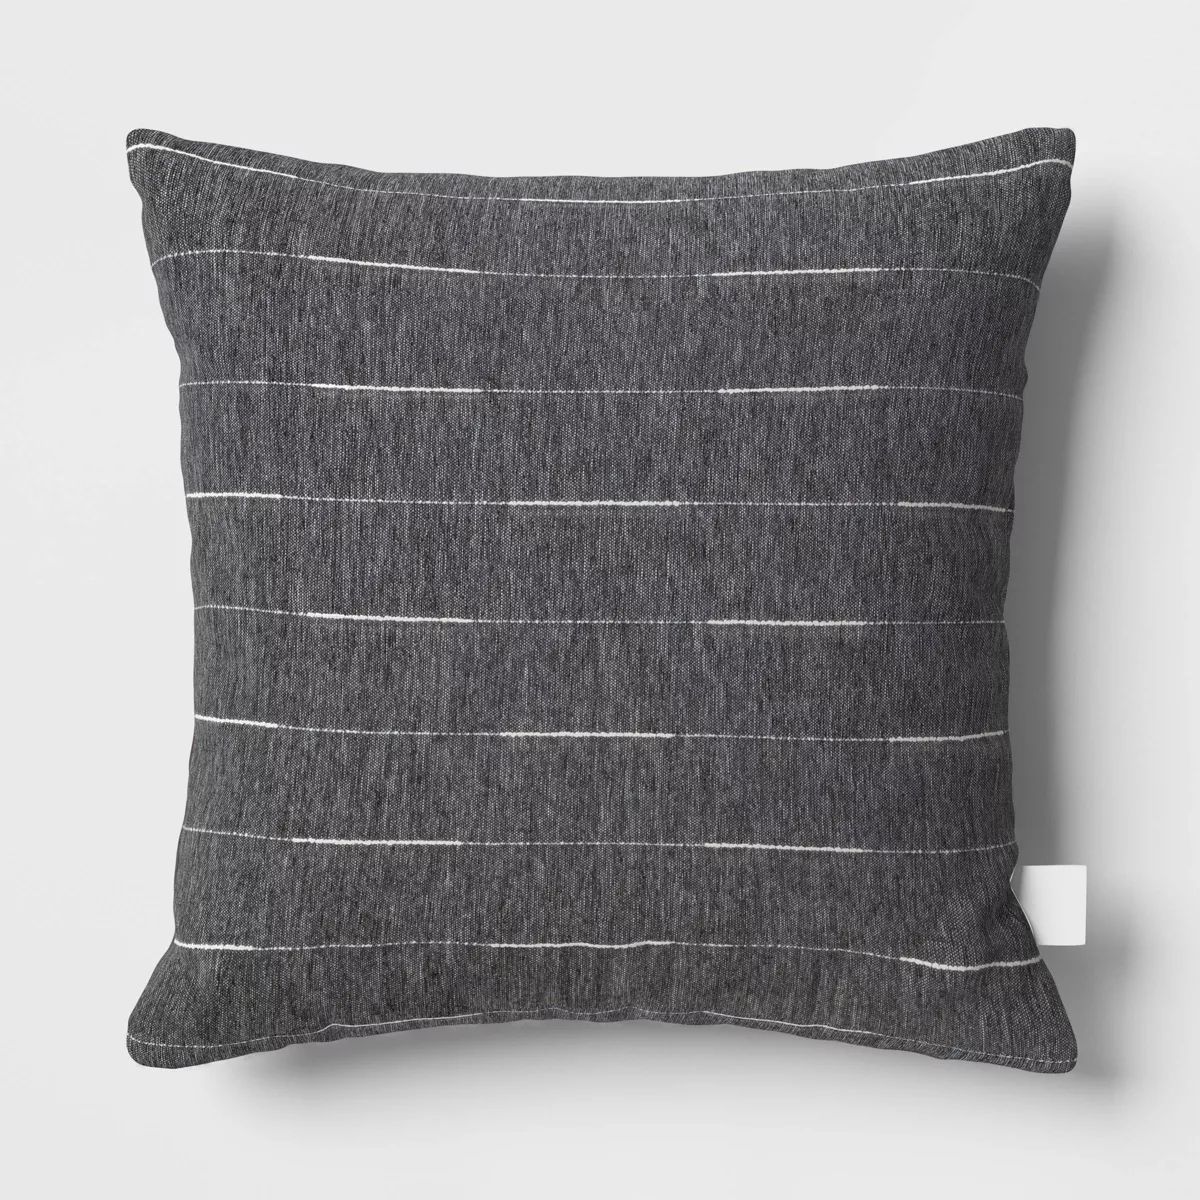 20"x20" Lines Square Outdoor Throw Pillow Charcoal Gray - Threshold™ | Target